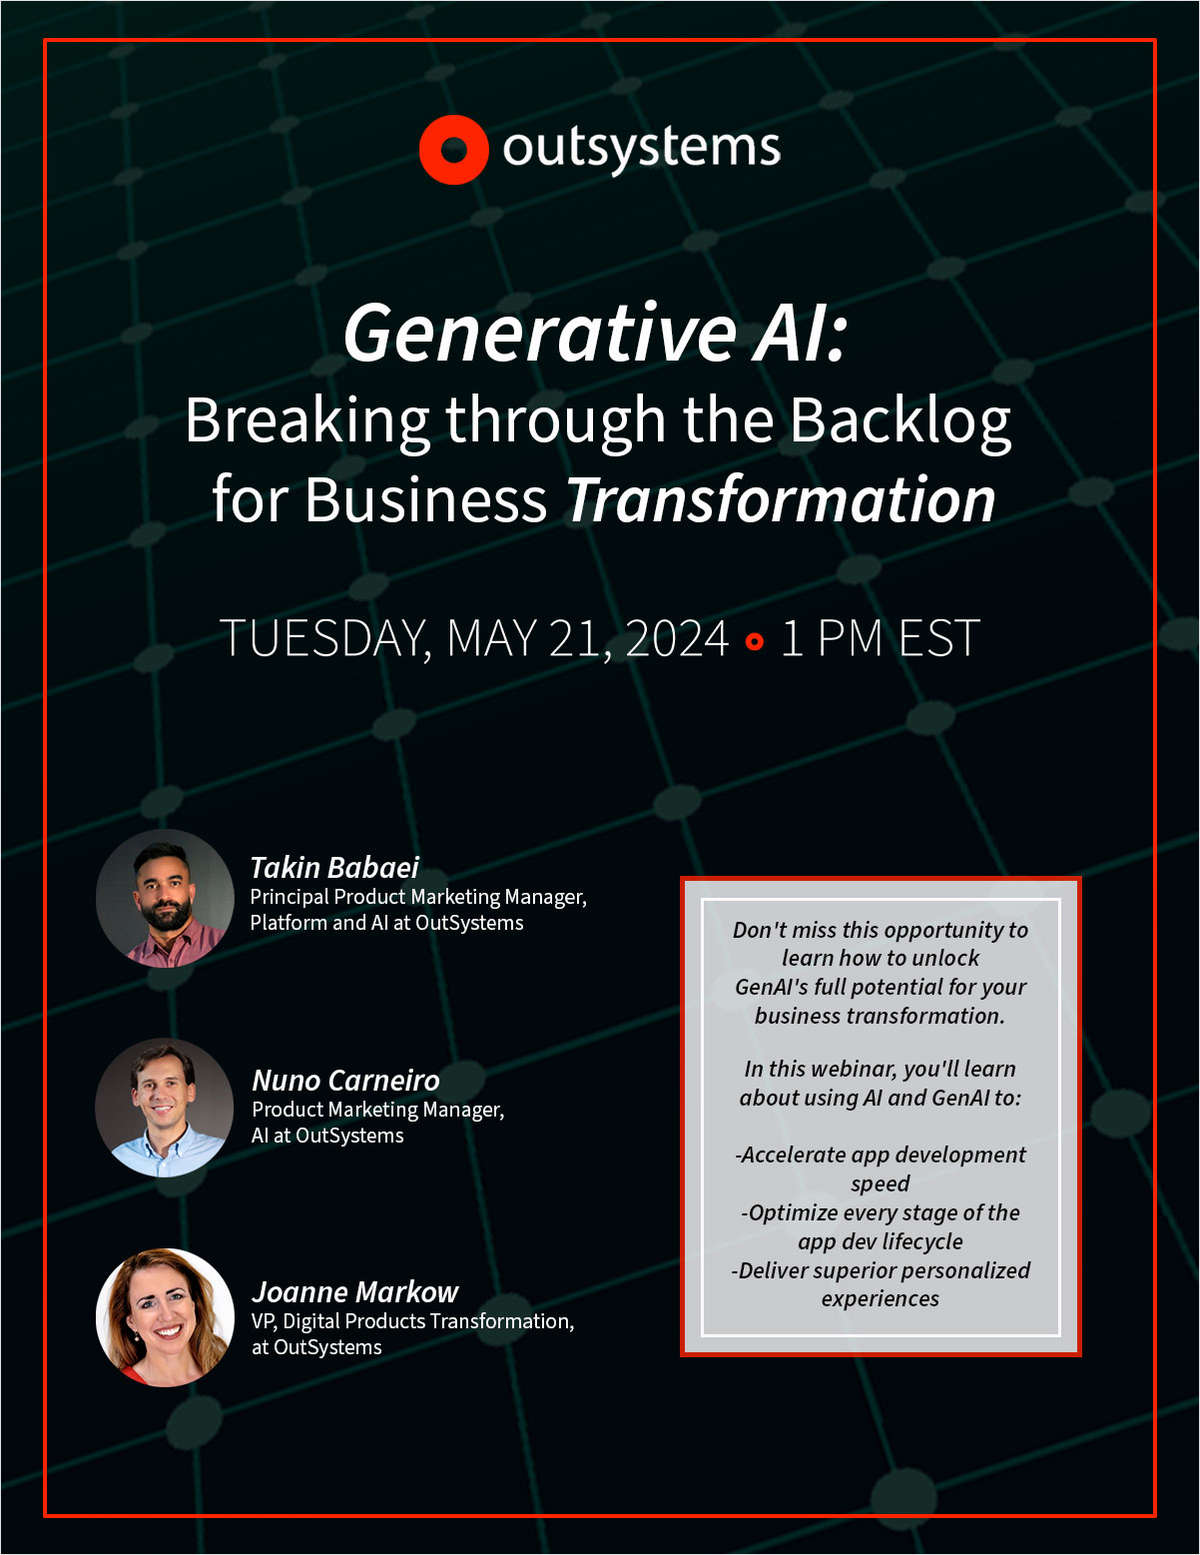 Generative AI - Breaking through the backlog for business transformation